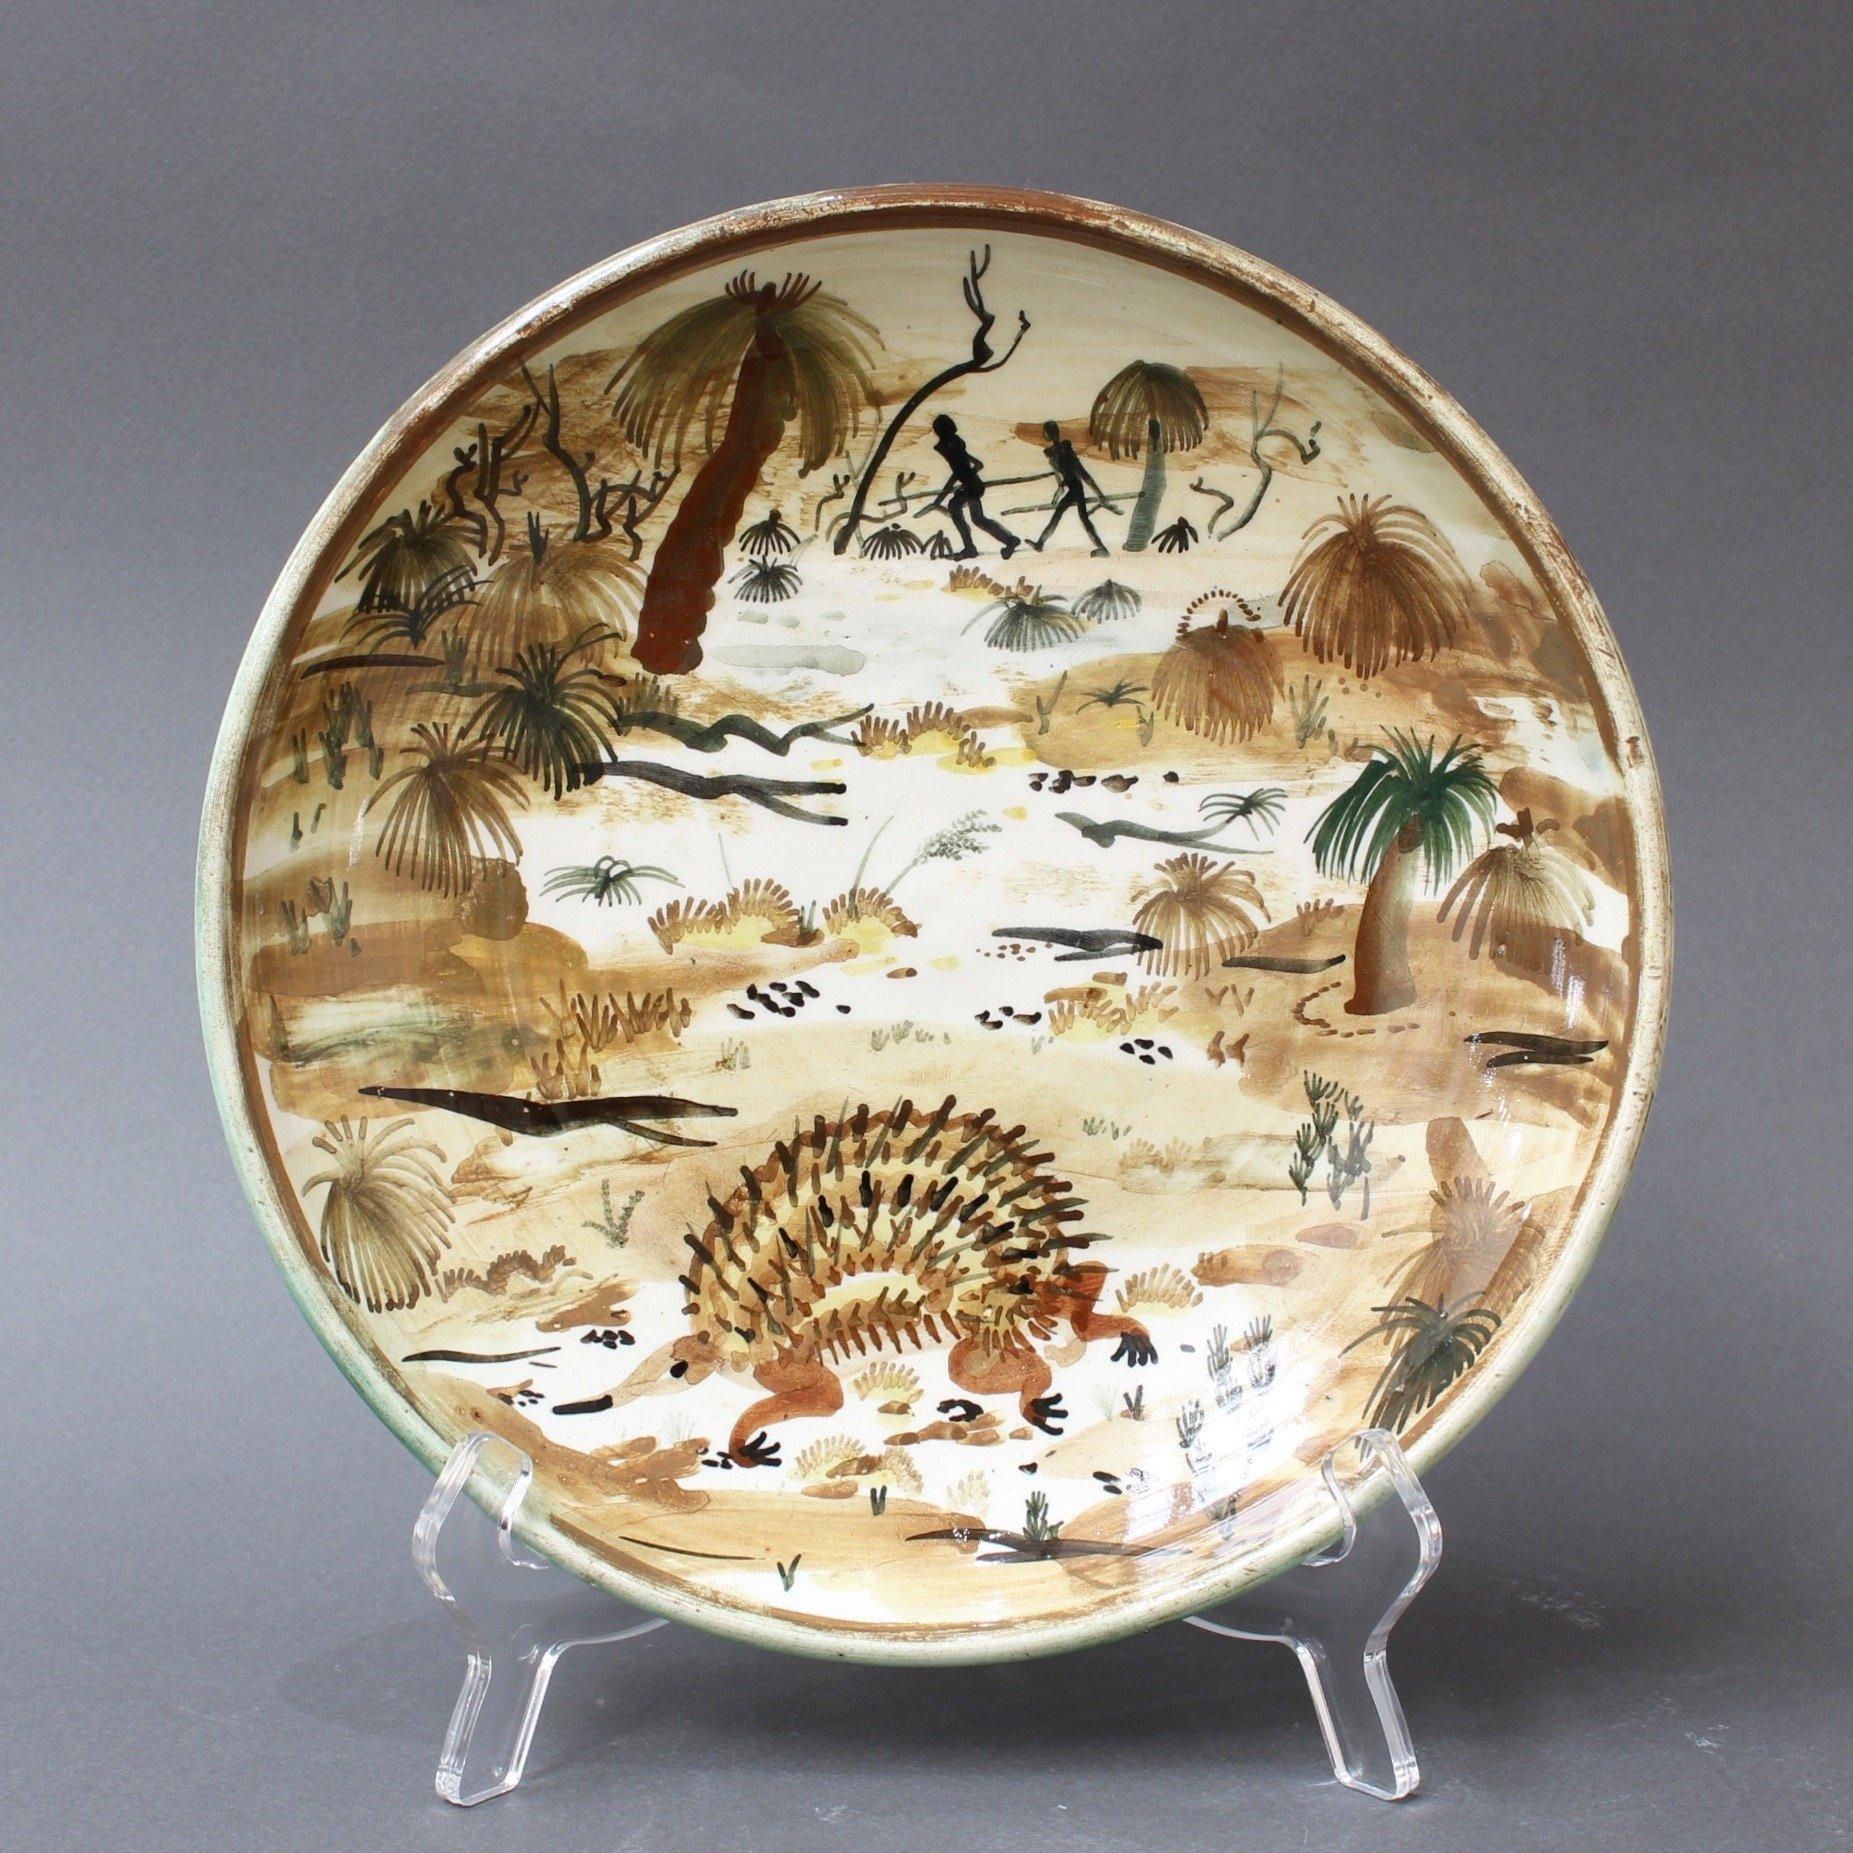 Ceramic decorative plate of Australian Bush by Neil Douglas for Arthur Merric Boyd (AMB) Pottery (circa 1950s). The circular earthenware bowl is hand painted with a bush scene of grass trees (Xanthorrhoeas), an unusual creature only found there, an